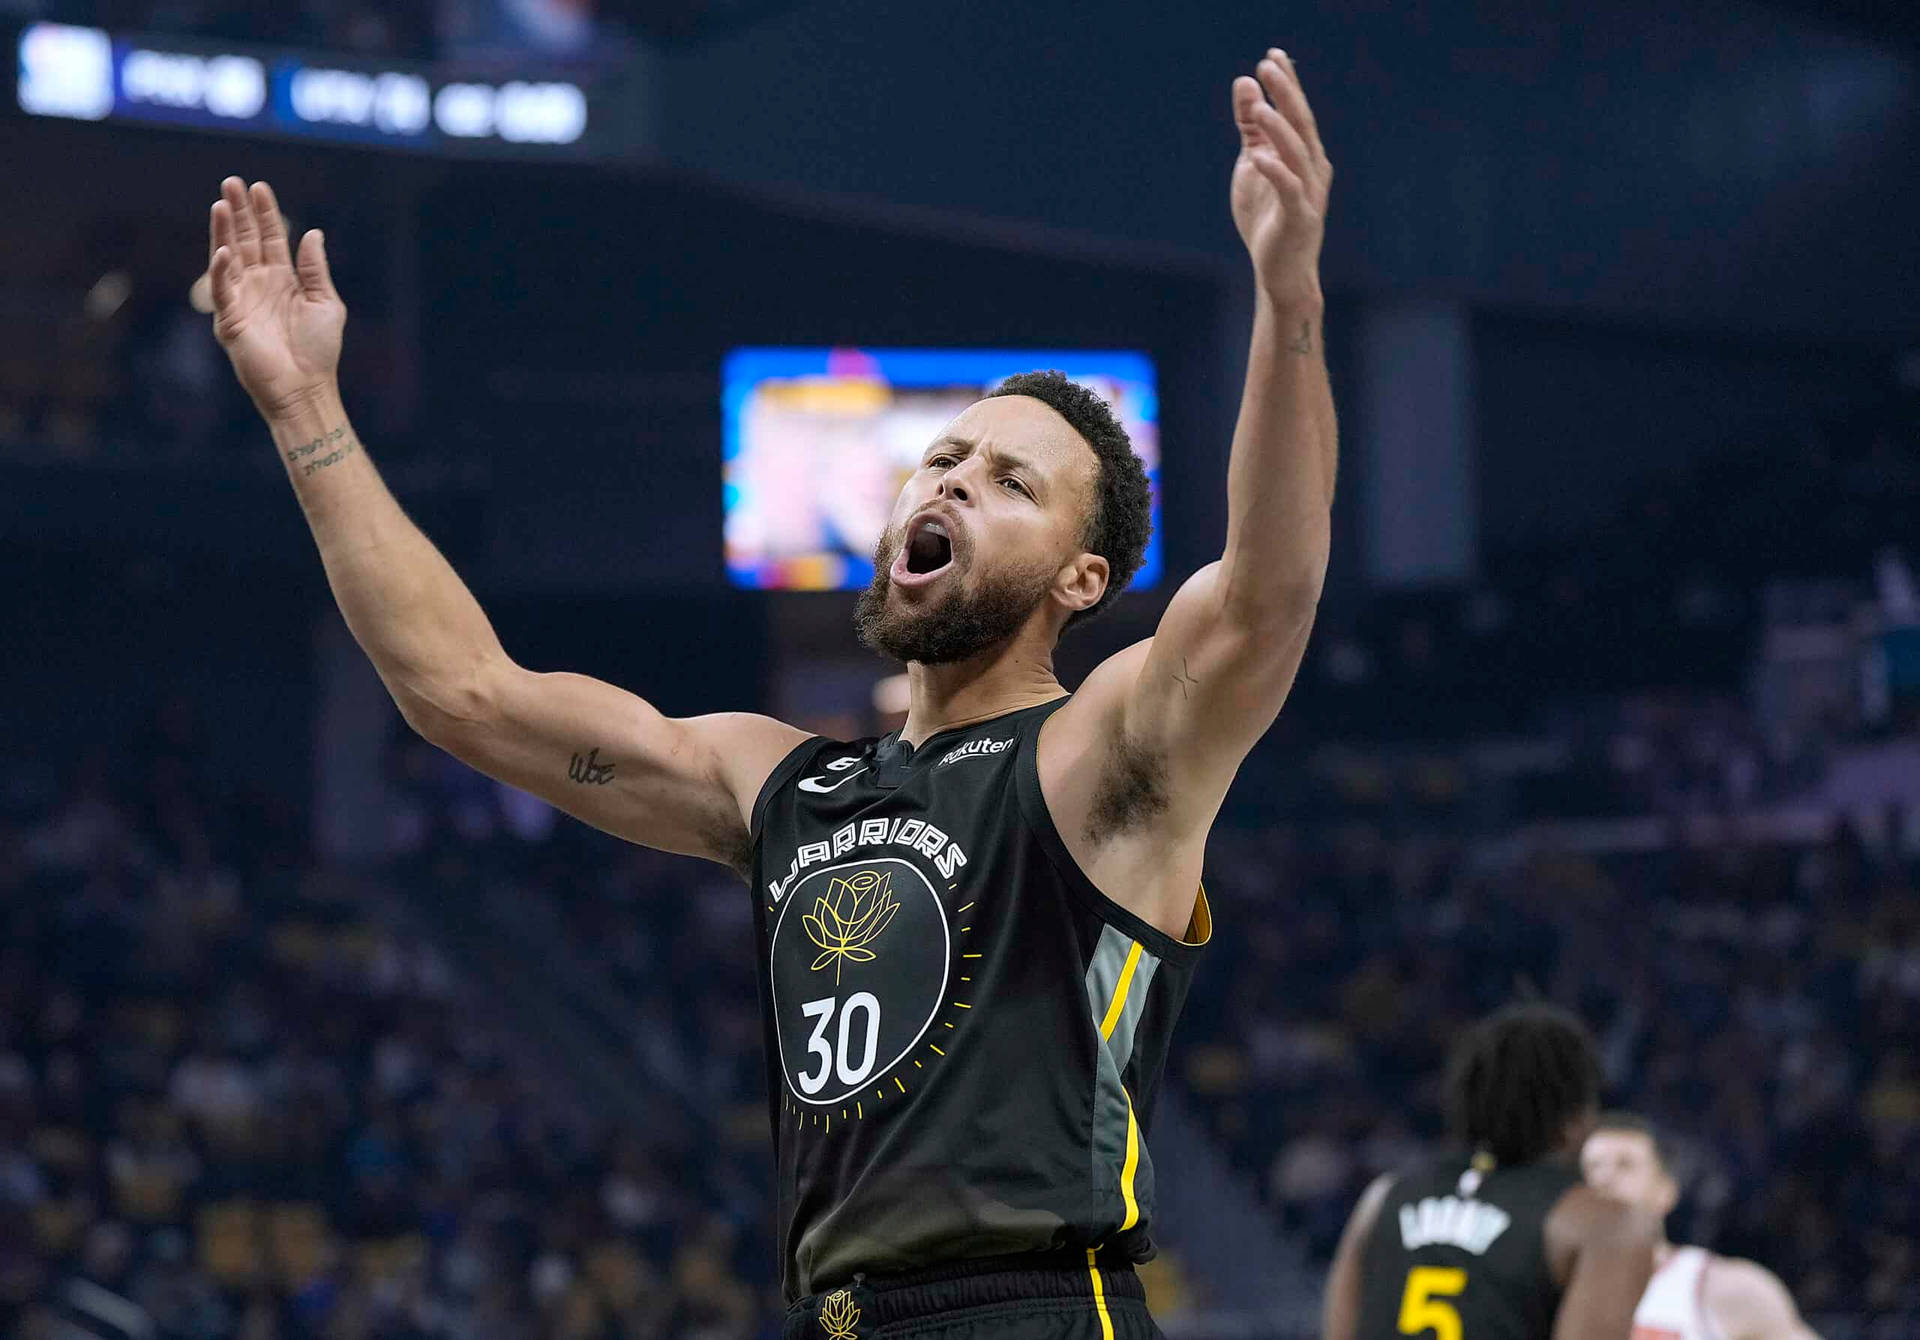 Steph Curry Celebrating With Arms Up Wallpaper